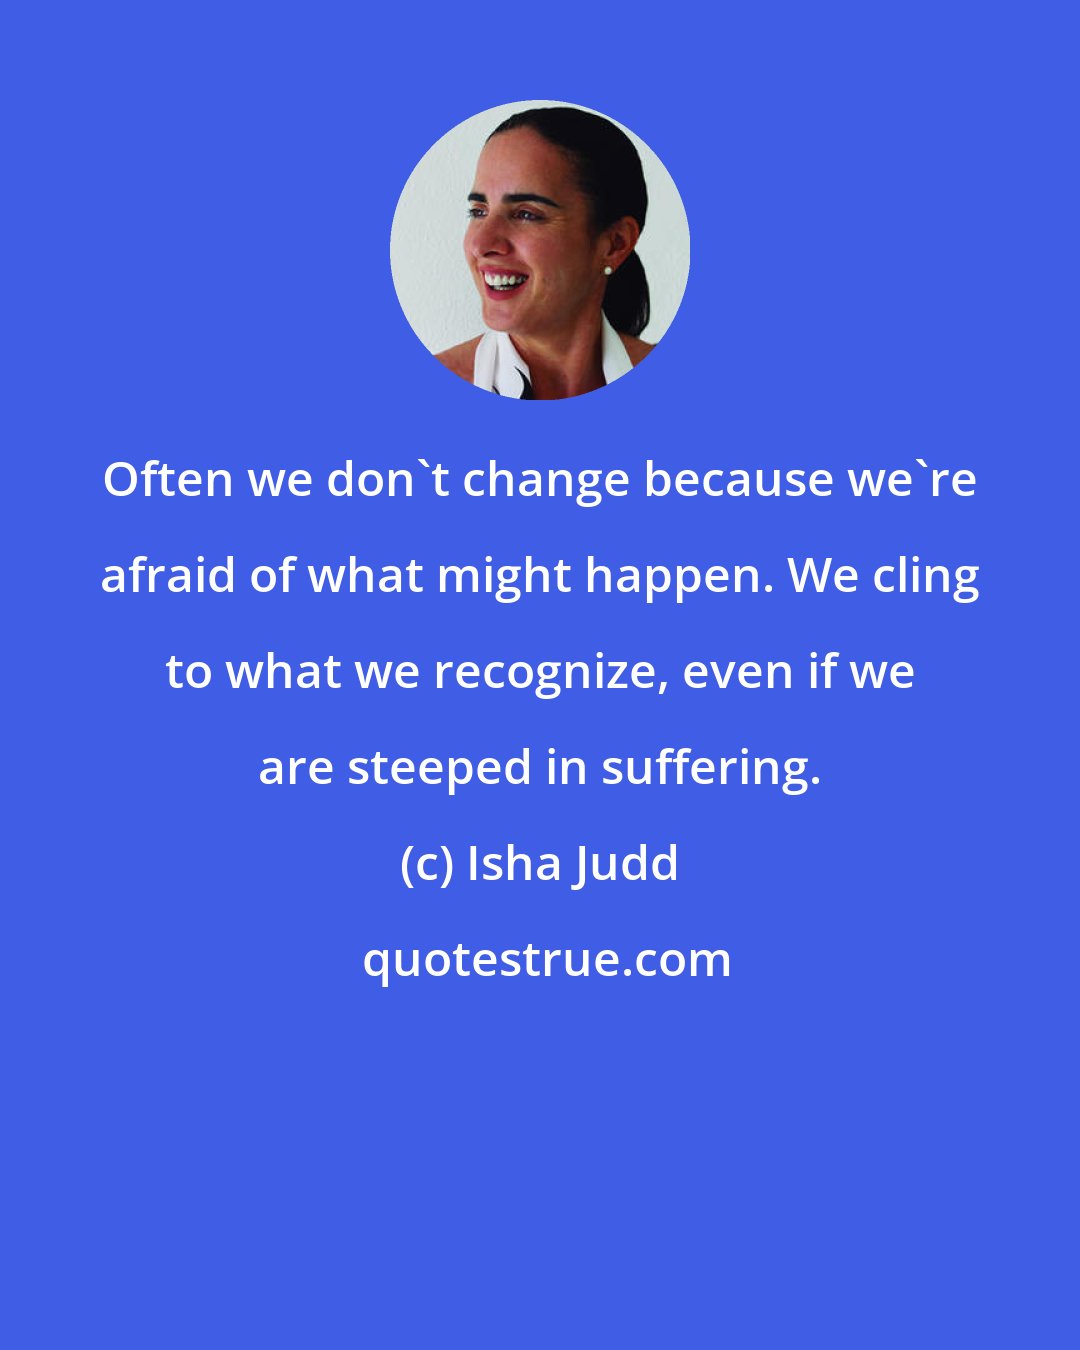 Isha Judd: Often we don't change because we're afraid of what might happen. We cling to what we recognize, even if we are steeped in suffering.